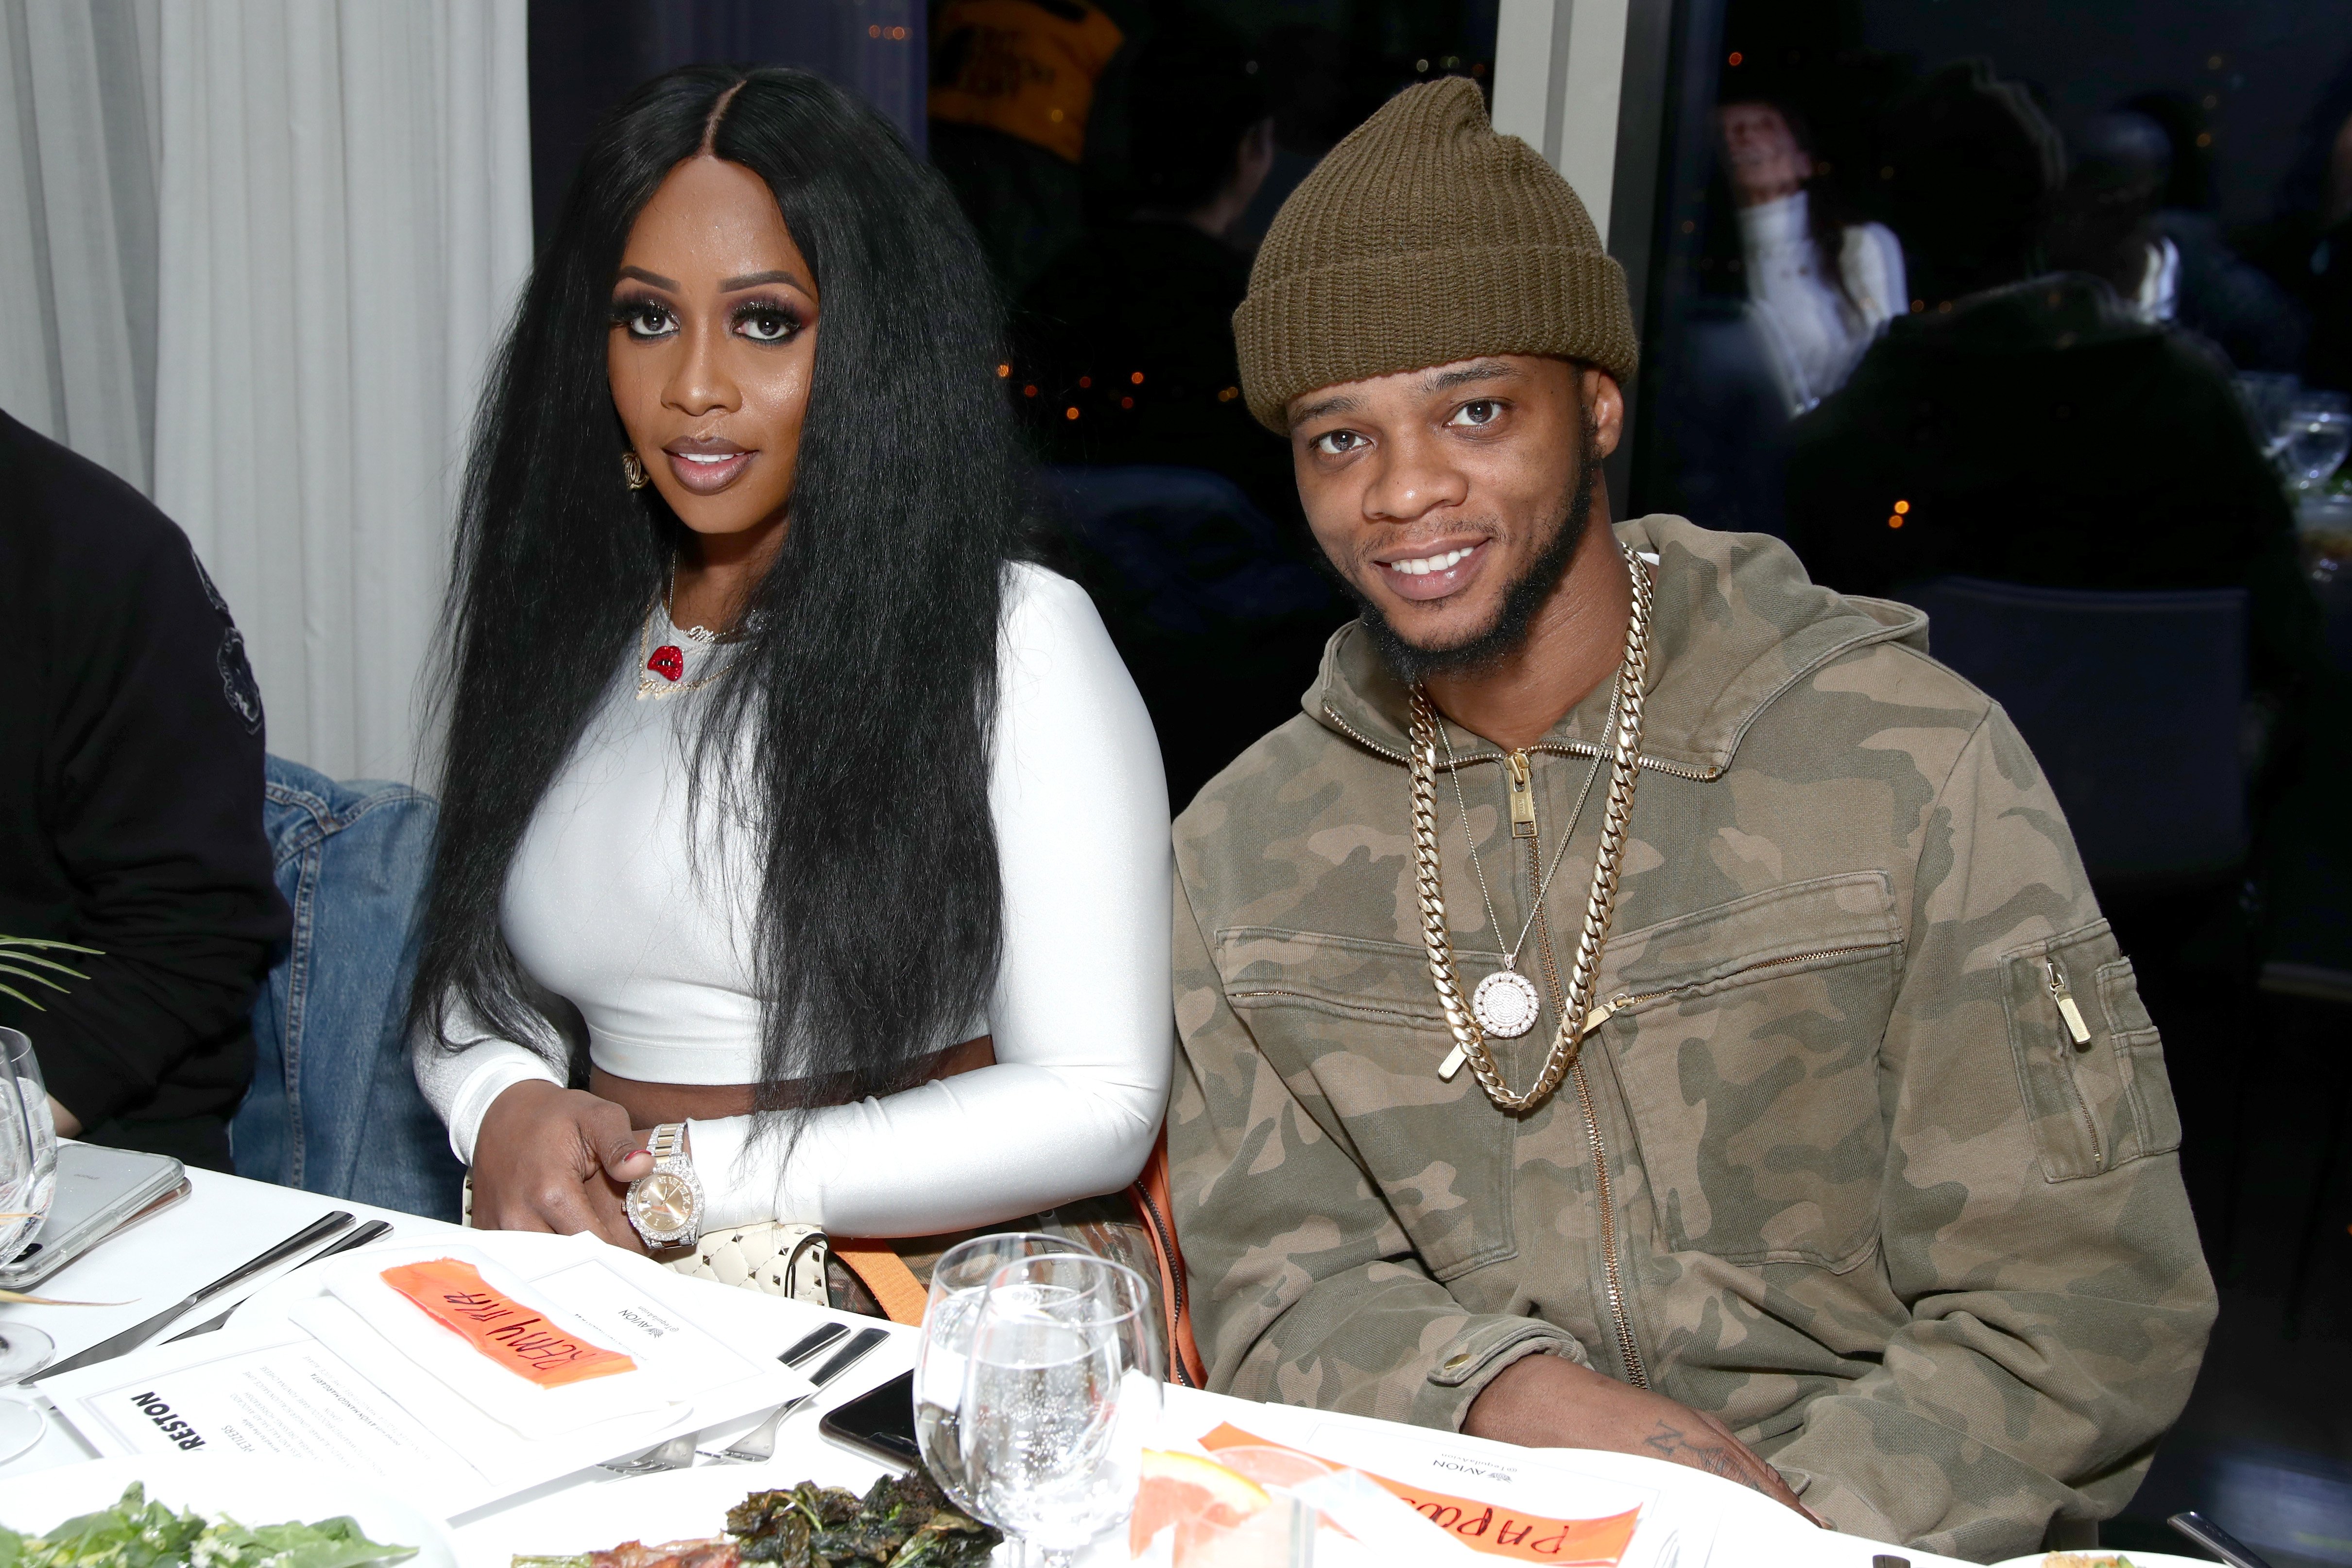 Remy Ma and Papoose Mackie attend the Heron Preston + Tequila Avion Dance Party on February 13, 2018 in New York City. | Photo: Getty Images